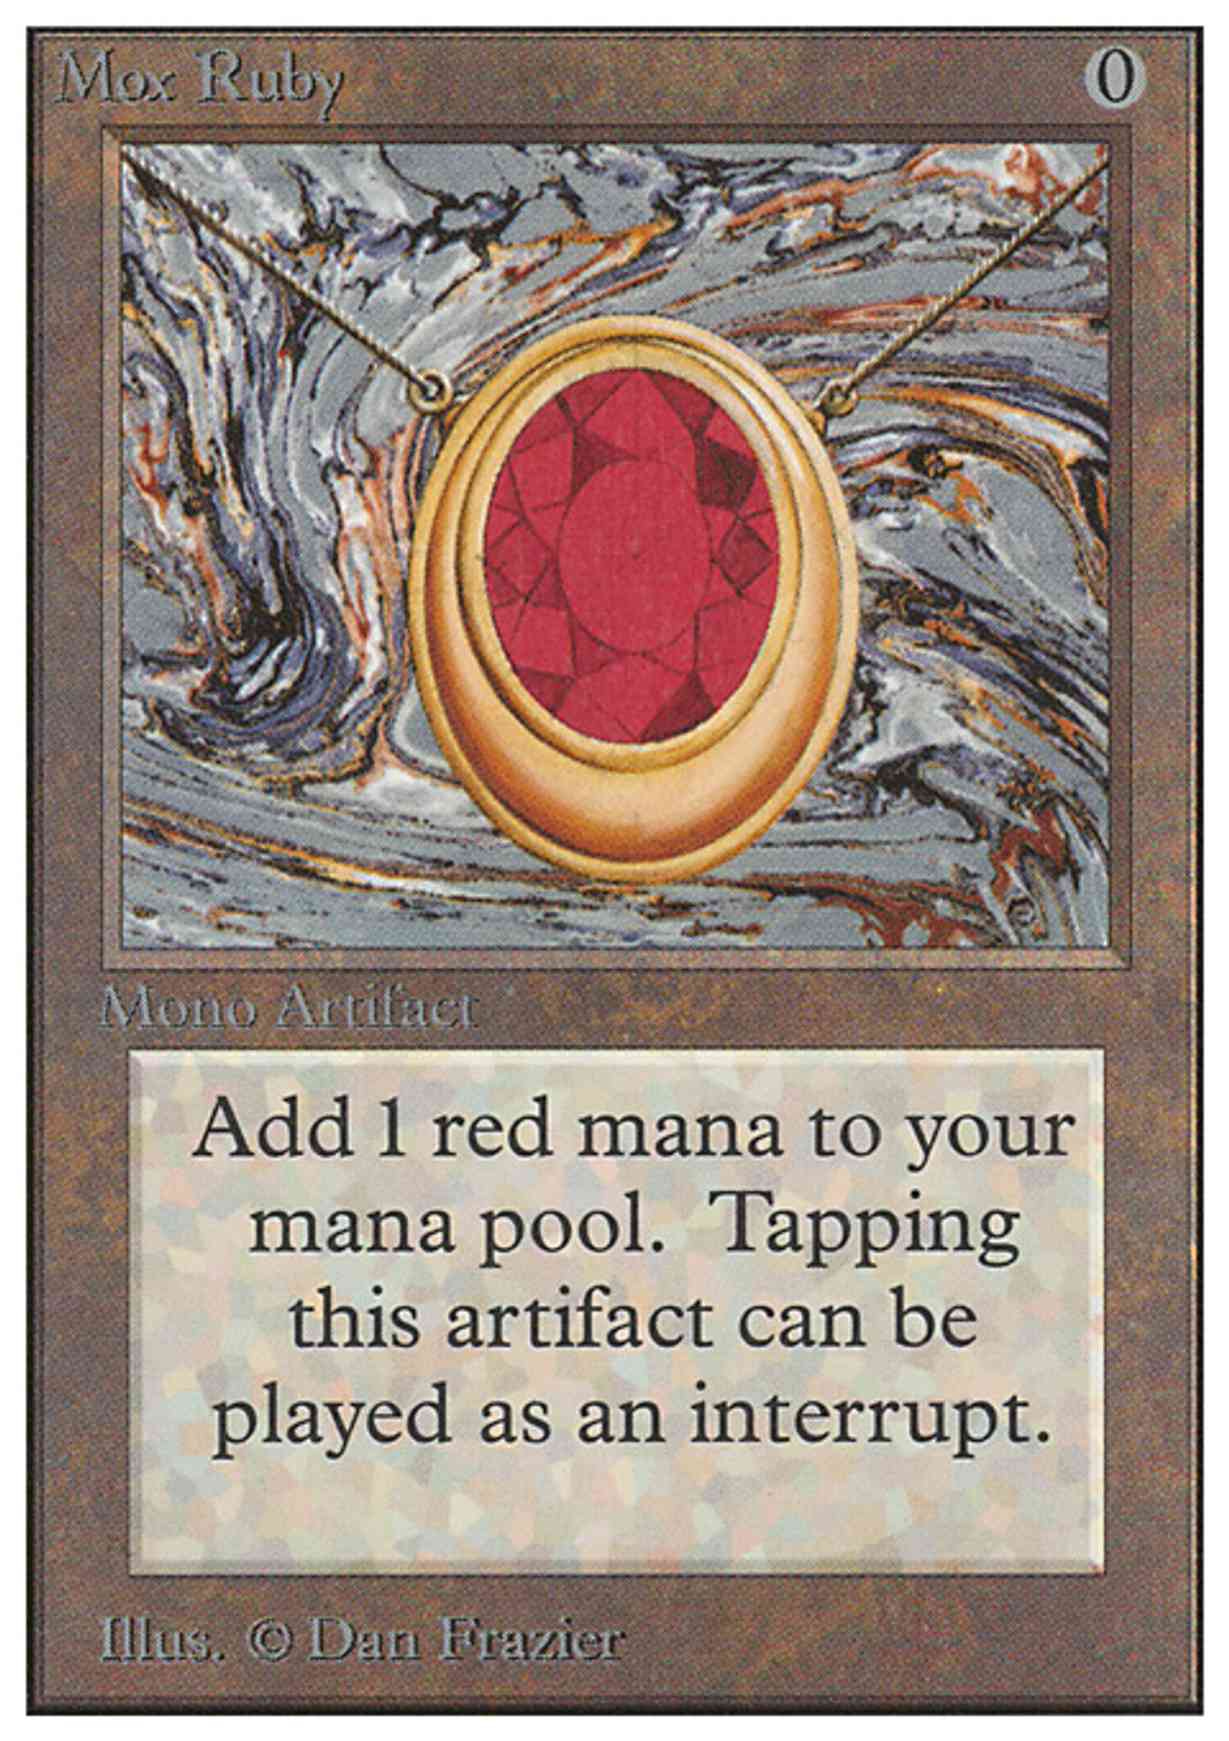 Mox Ruby magic card front